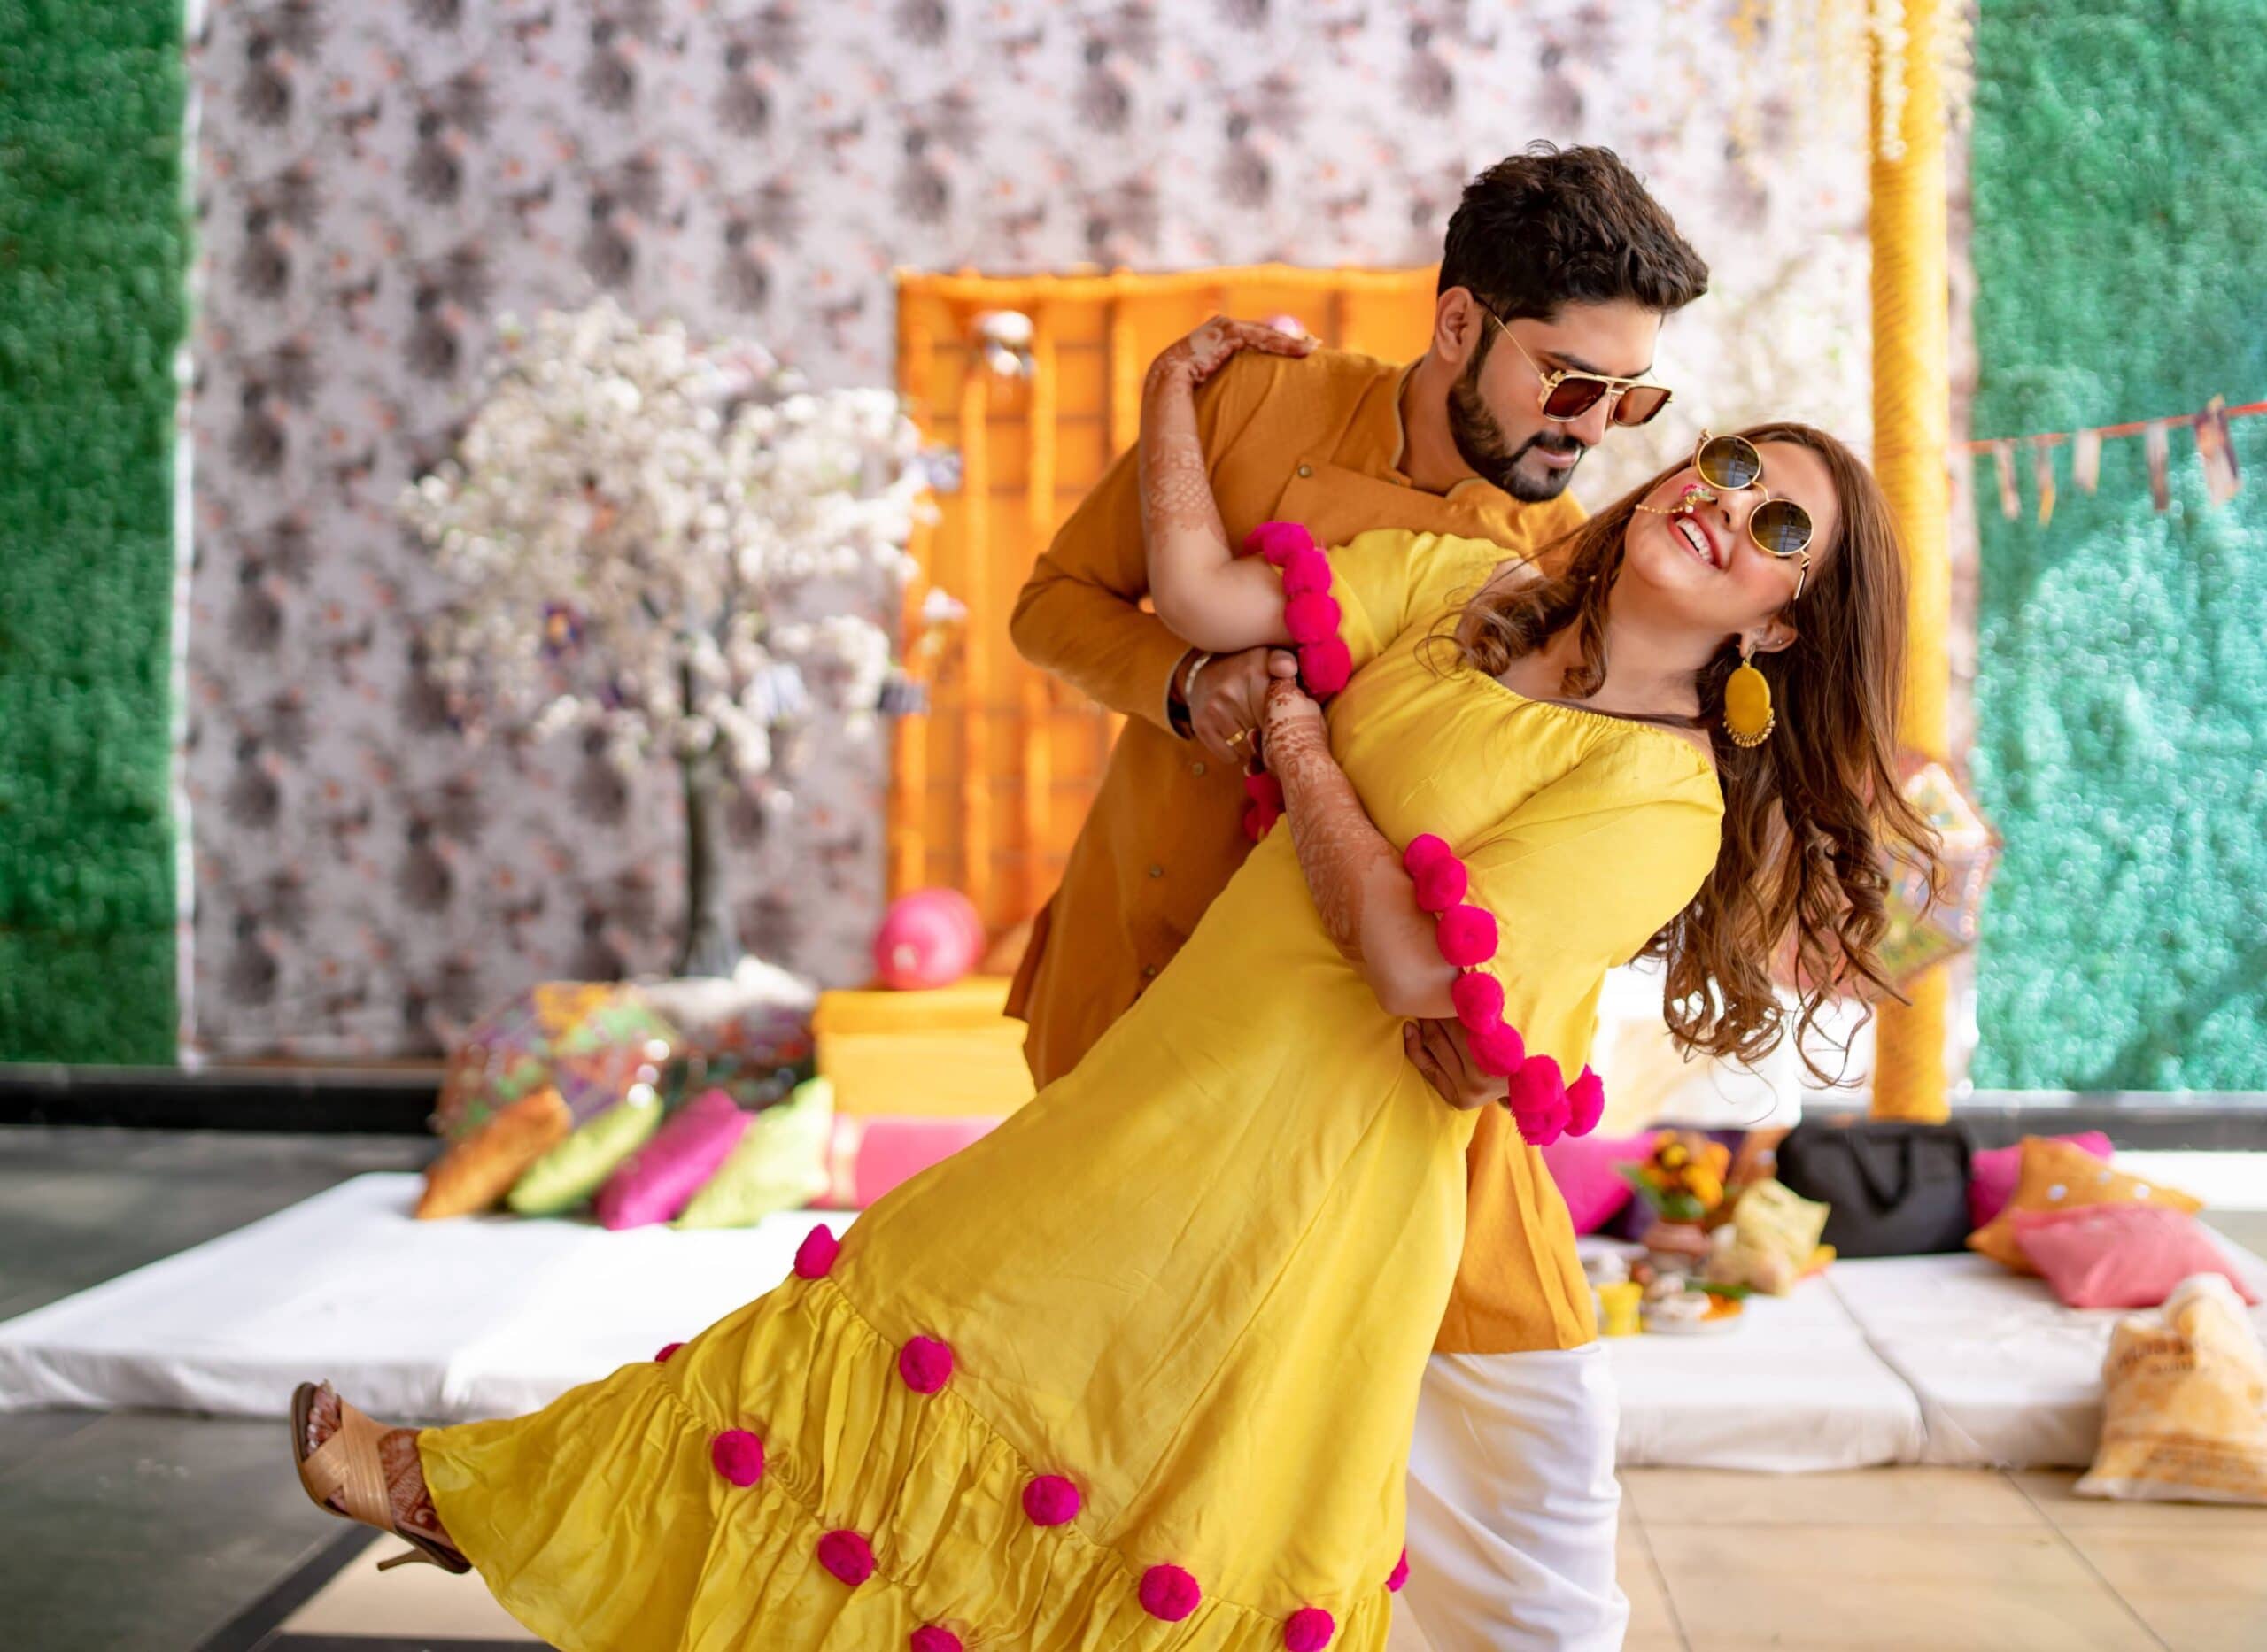 15 Beautiful Haldi Outfit Ideas for the Bride to Wear